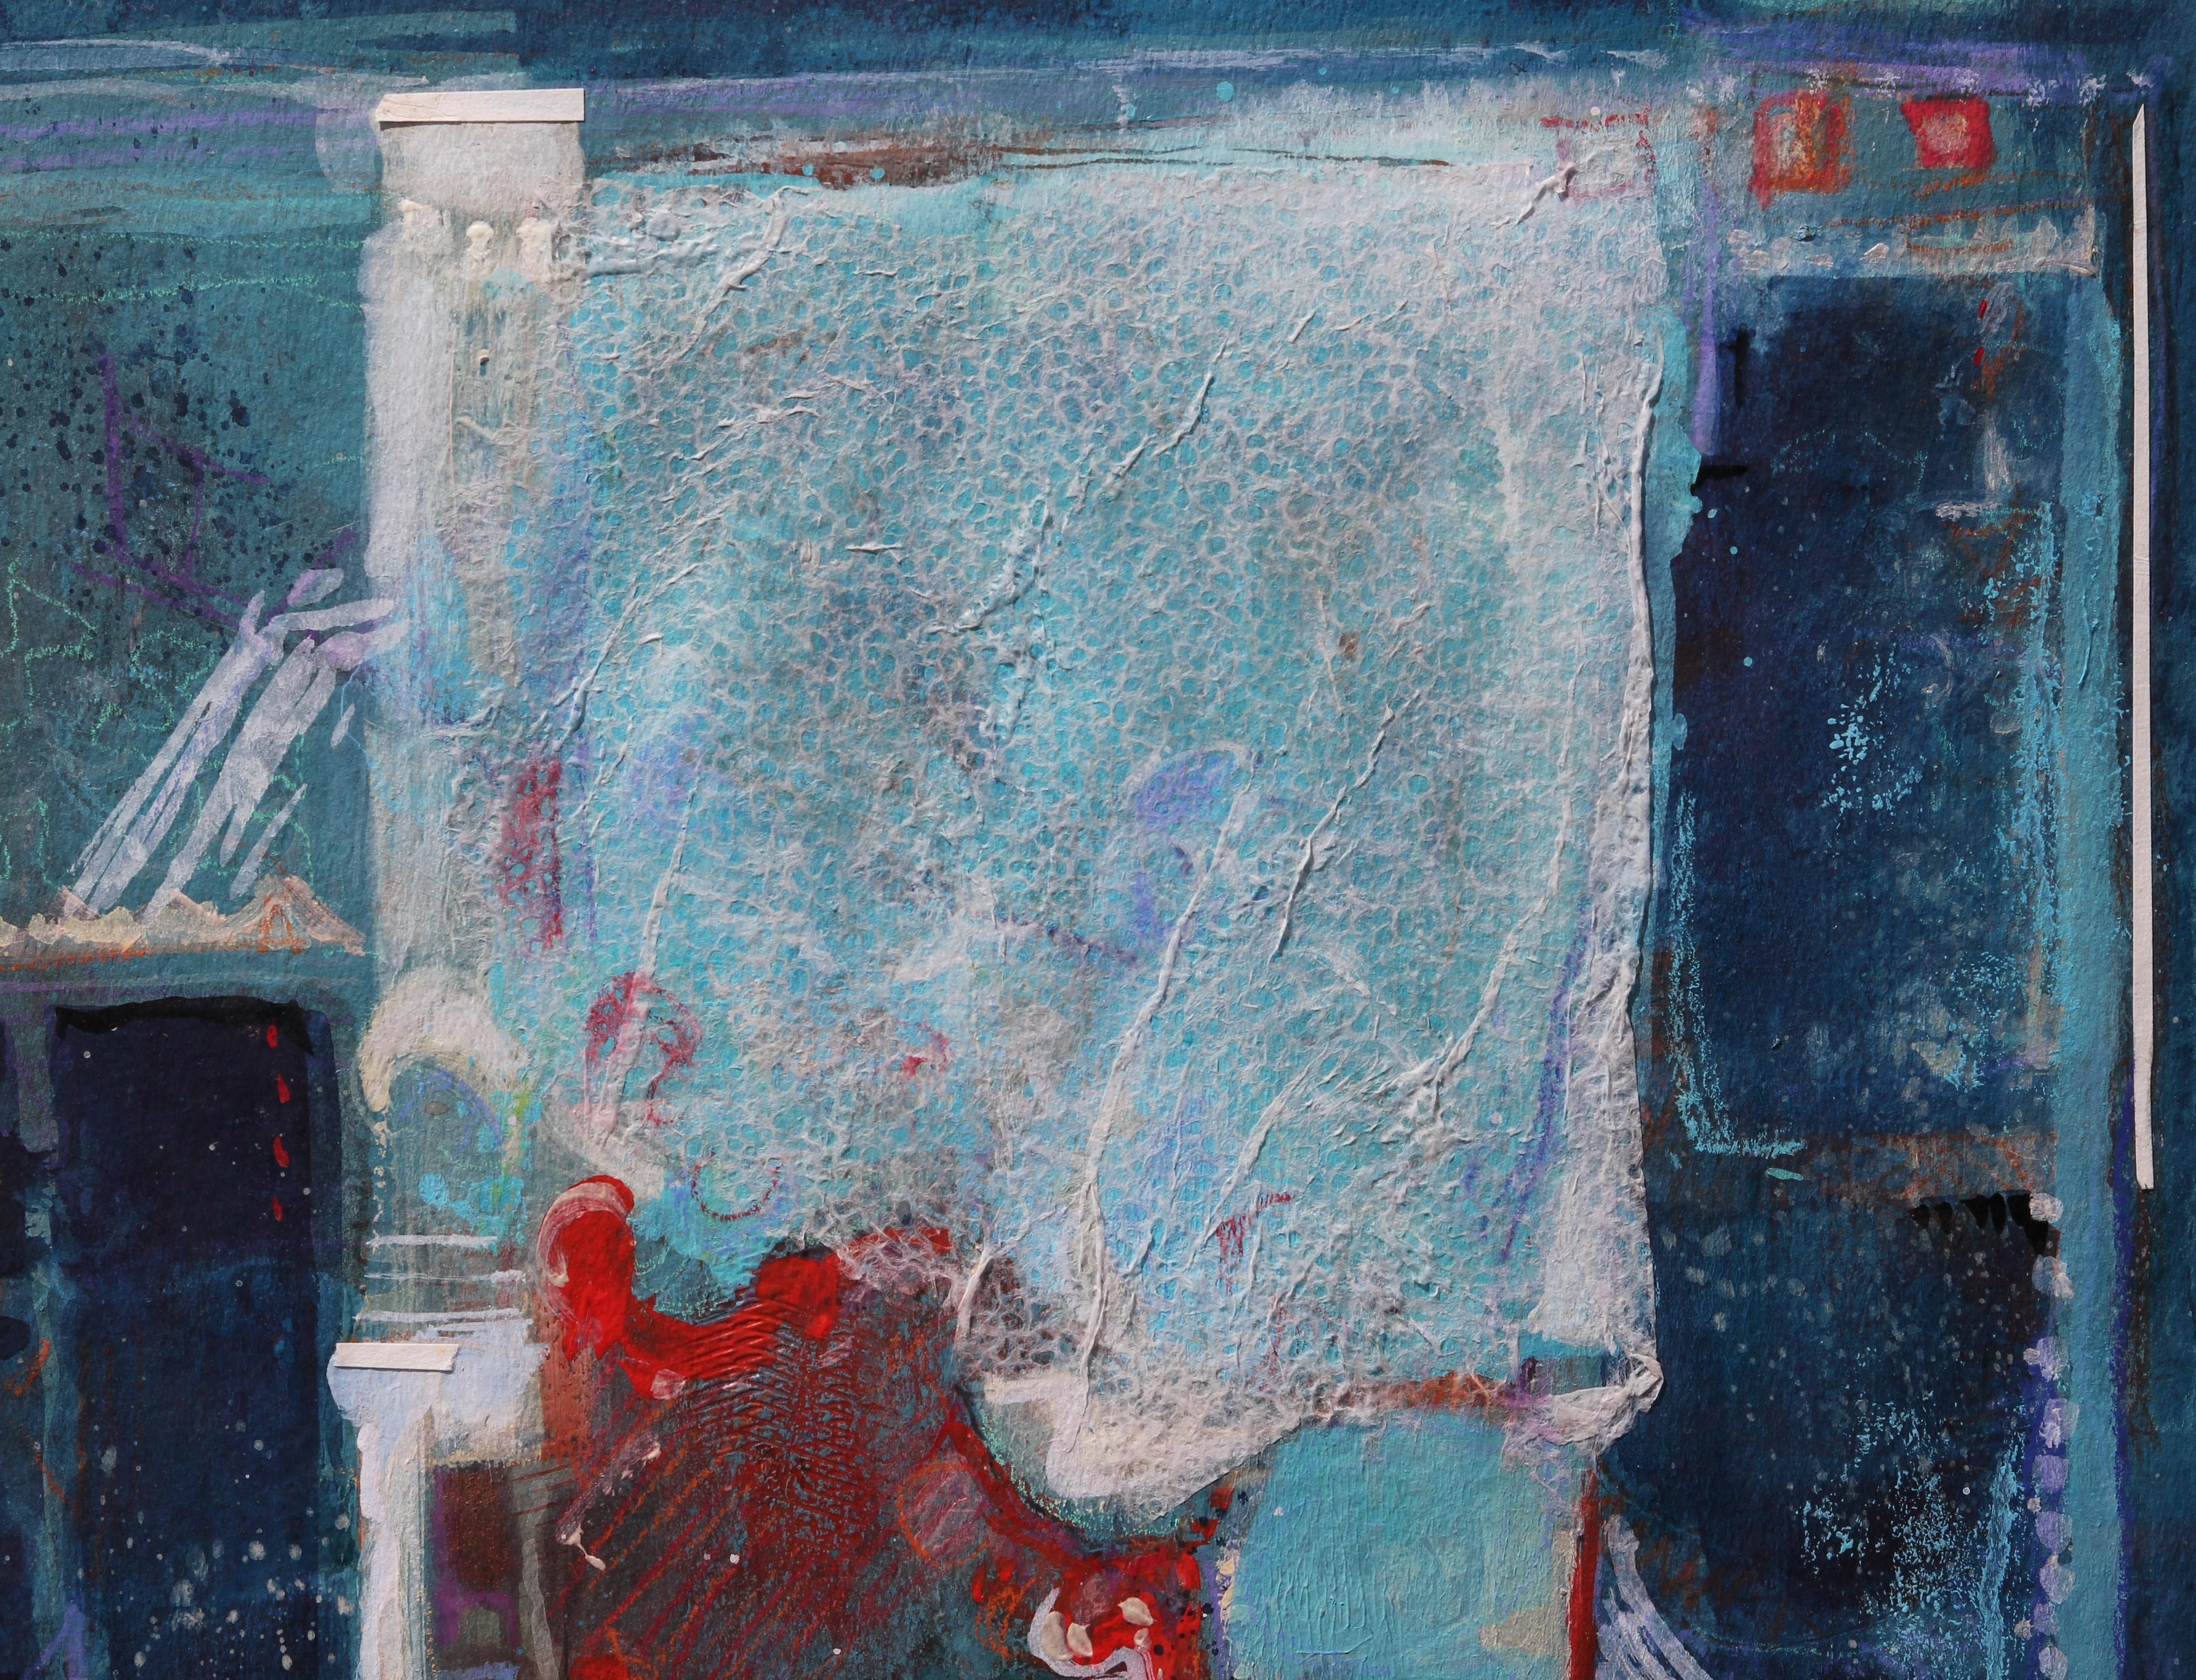 Blue, teal, and red modern abstract acrylic painting by Texas artist Carole Myers. The work features expressive strokes of cool toned colors accented by pops of red. The piece is signed in the front lower right corner. Currently hung in a metal